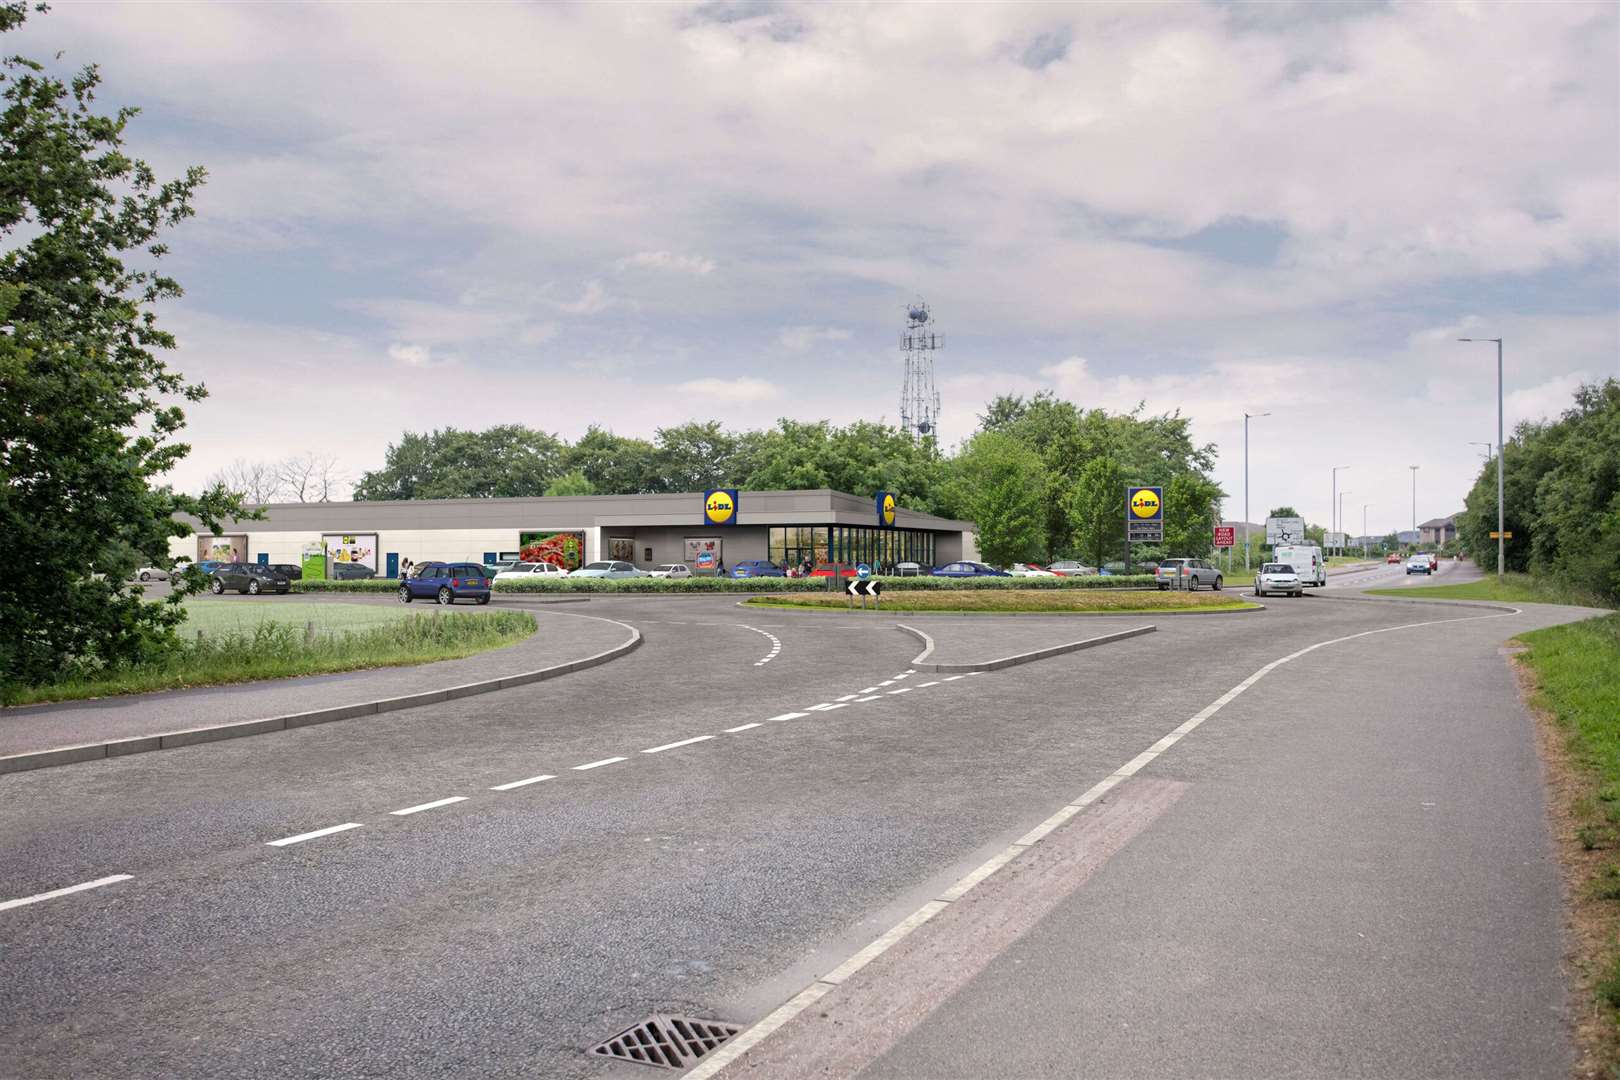 Lidl is carrying out a consultation for plans to build a new supermarket near Inshes roundabout.